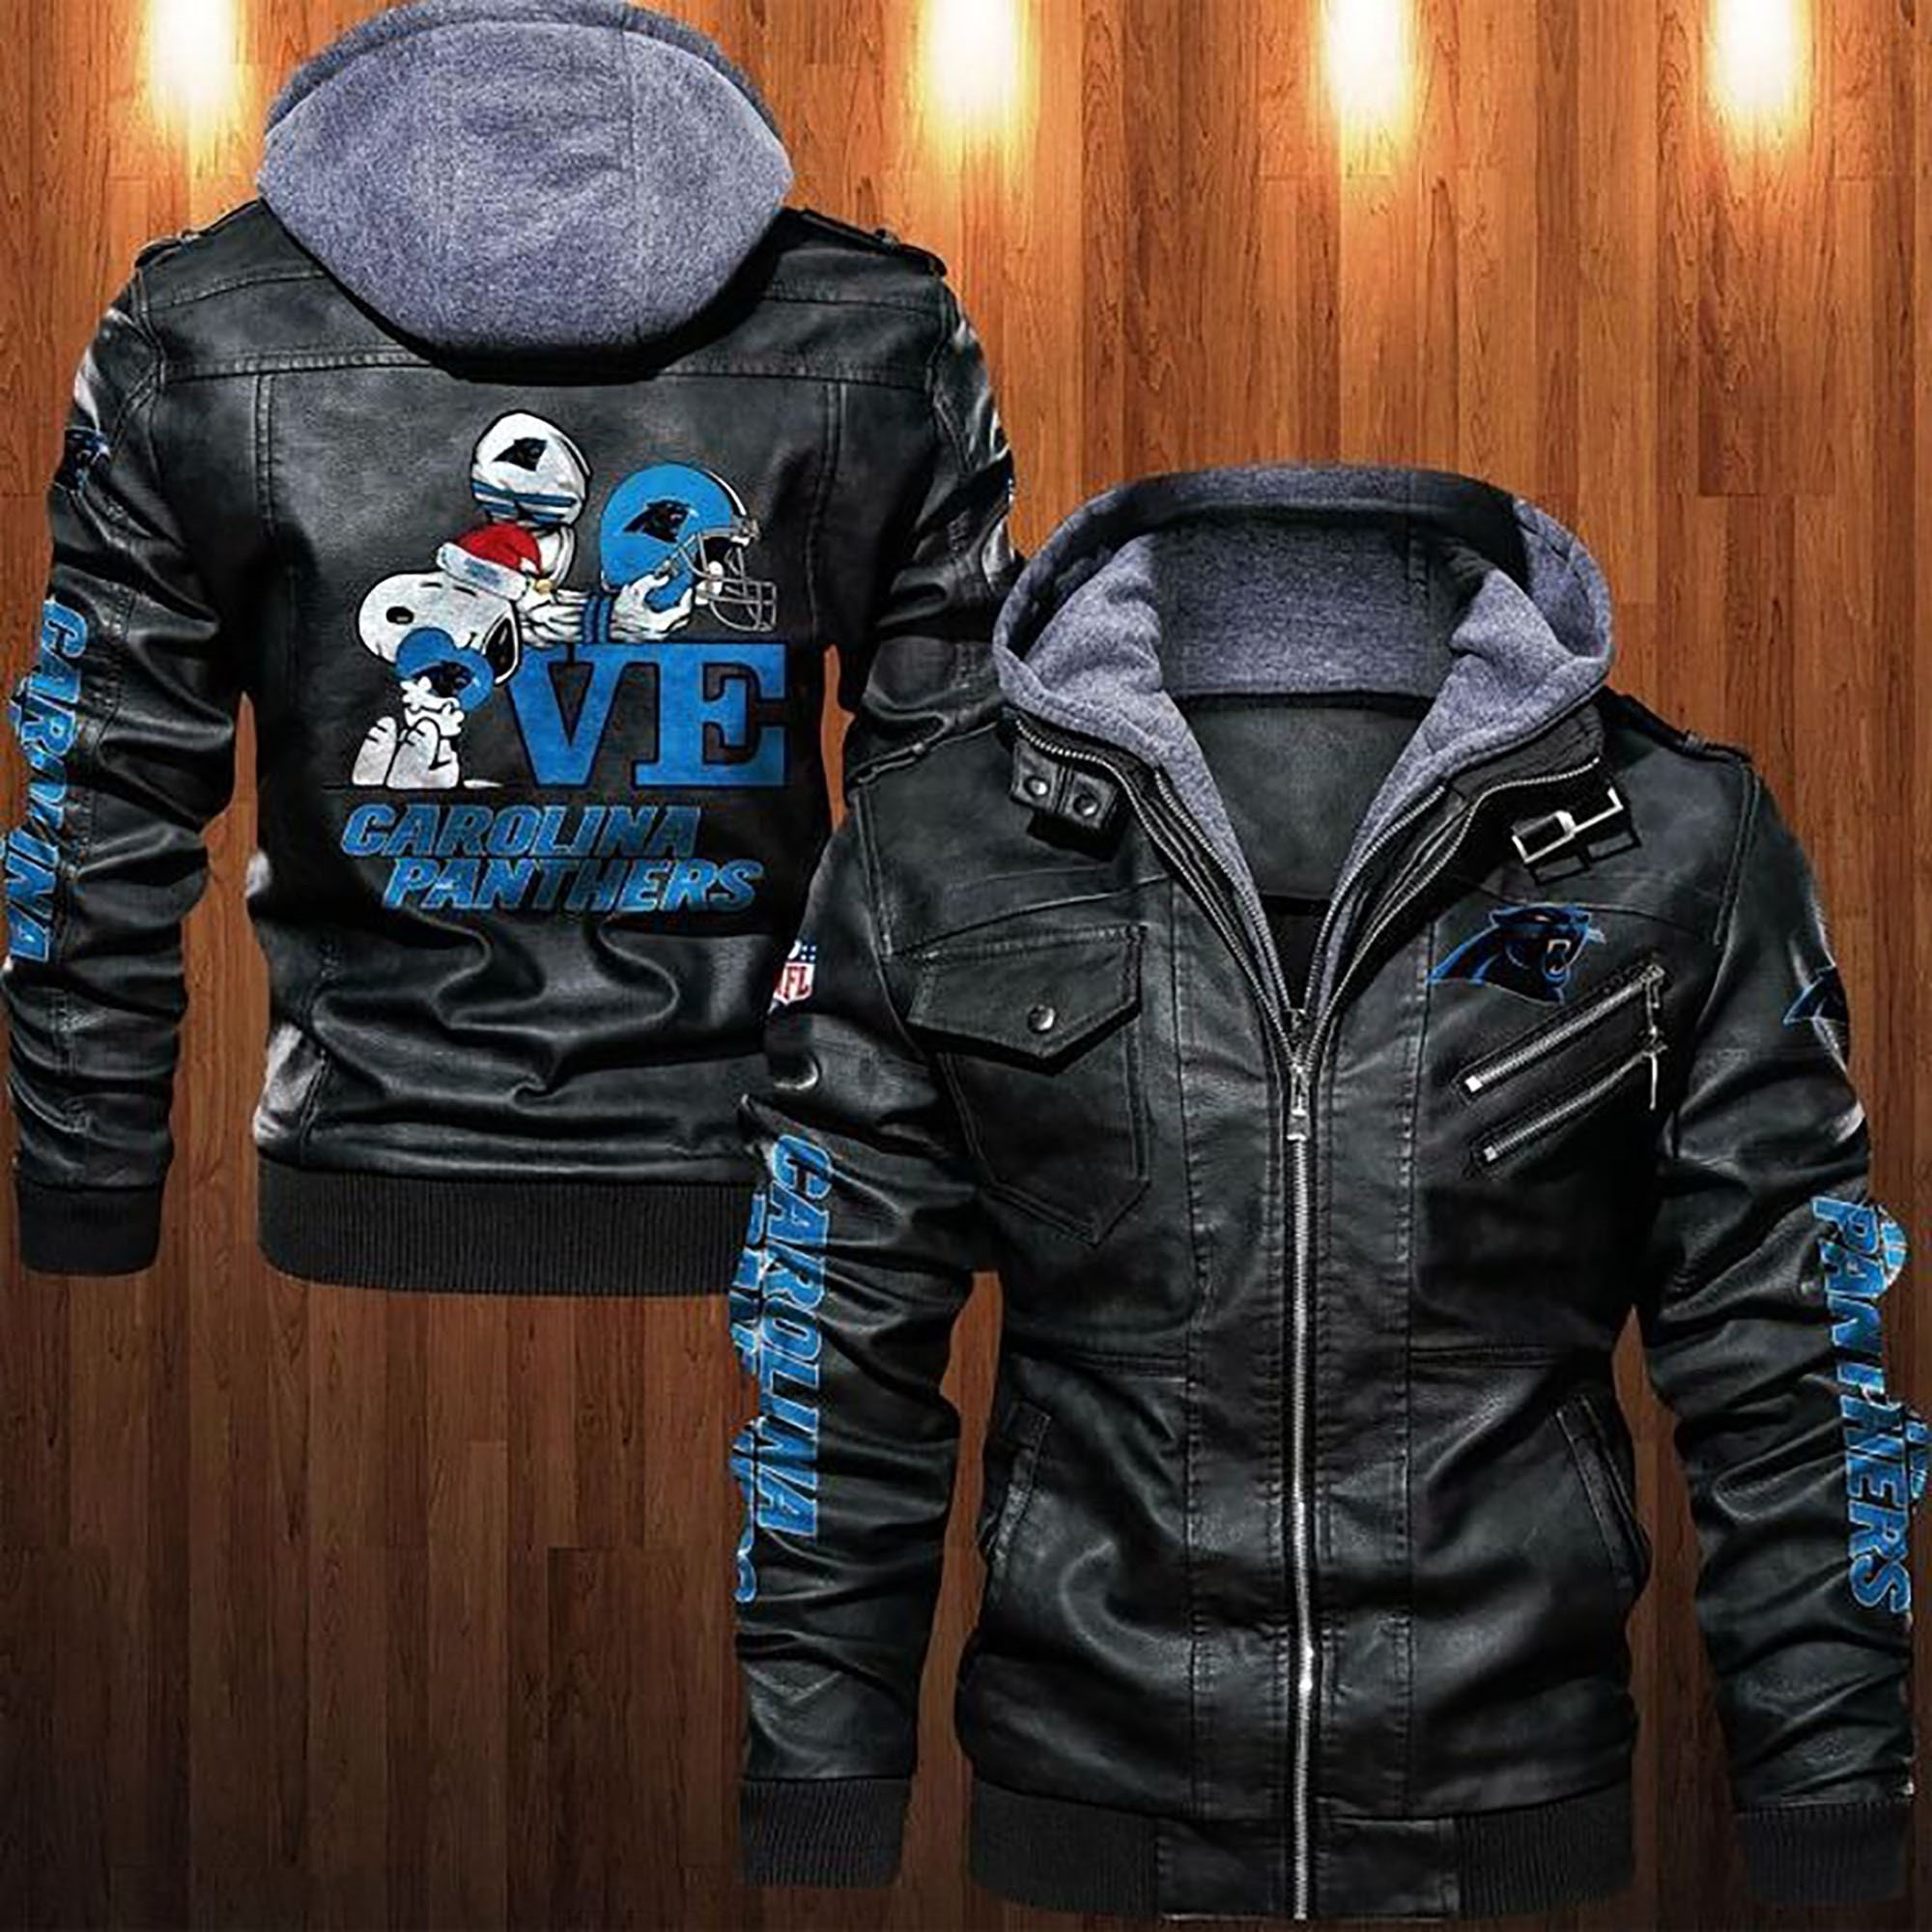 These Amazing Leather Jacket will add to the appeal of your outfit 105